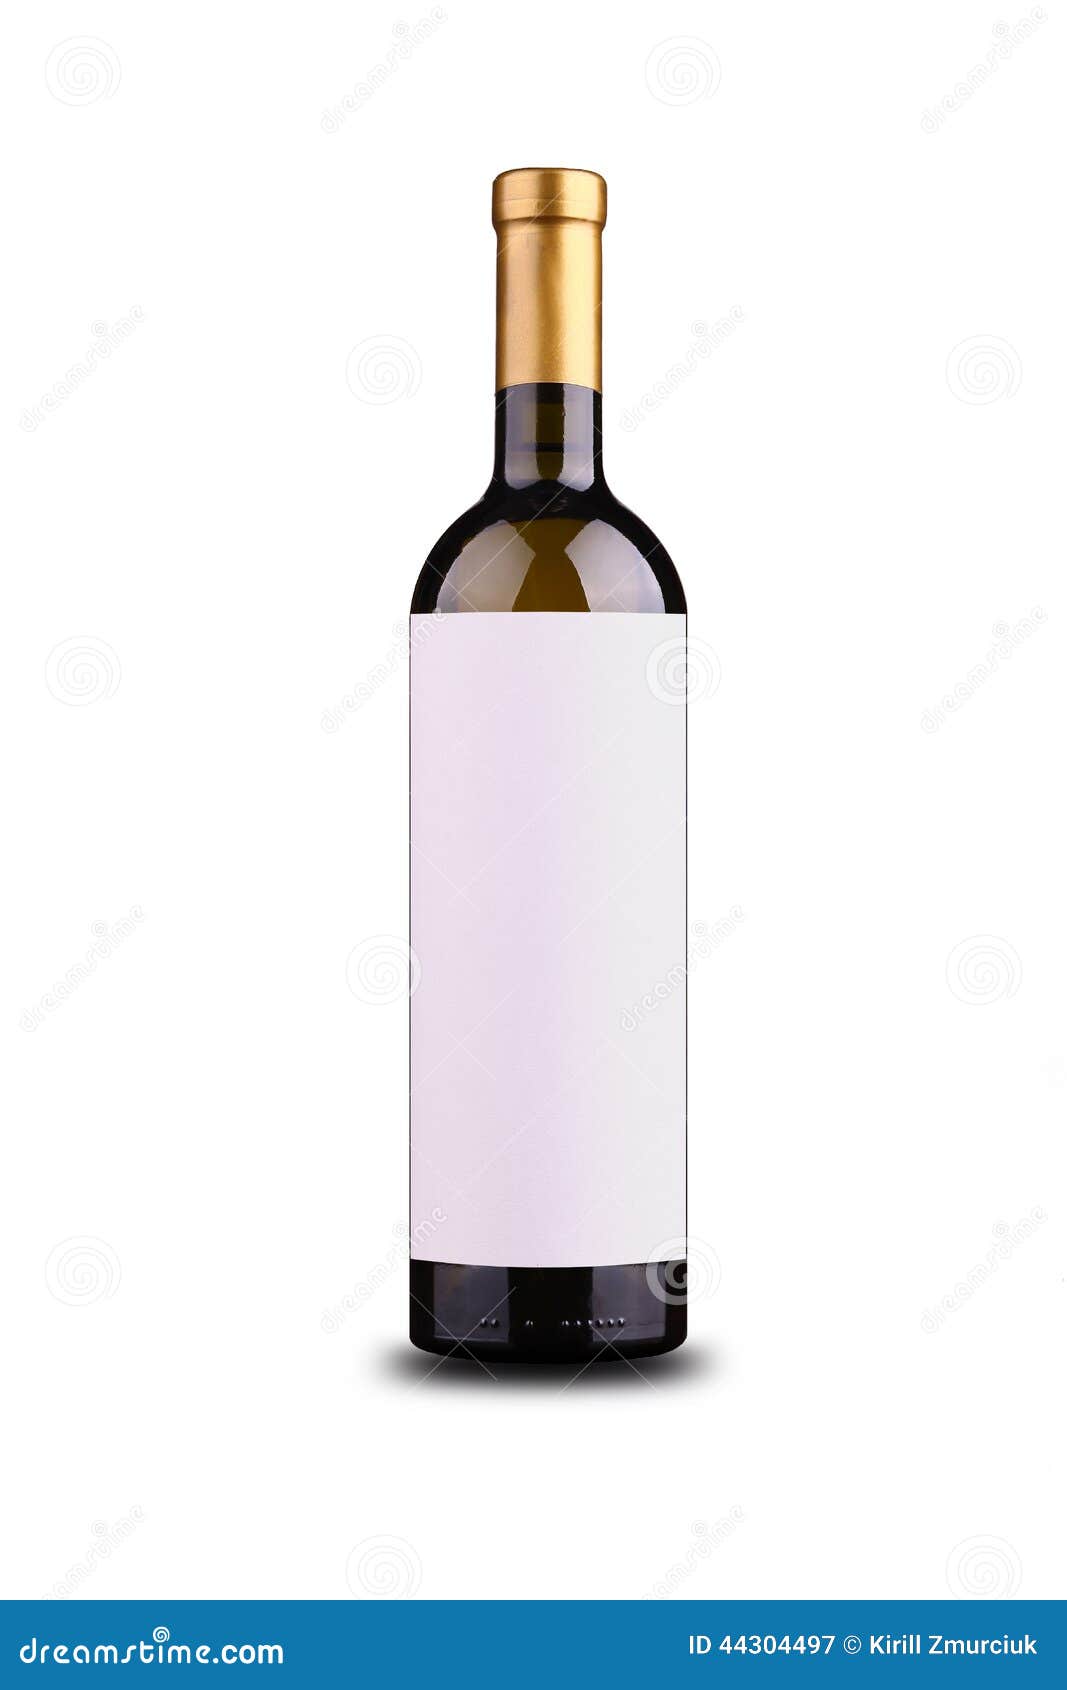 Bottle of white wine with blank plain label isolated over white.